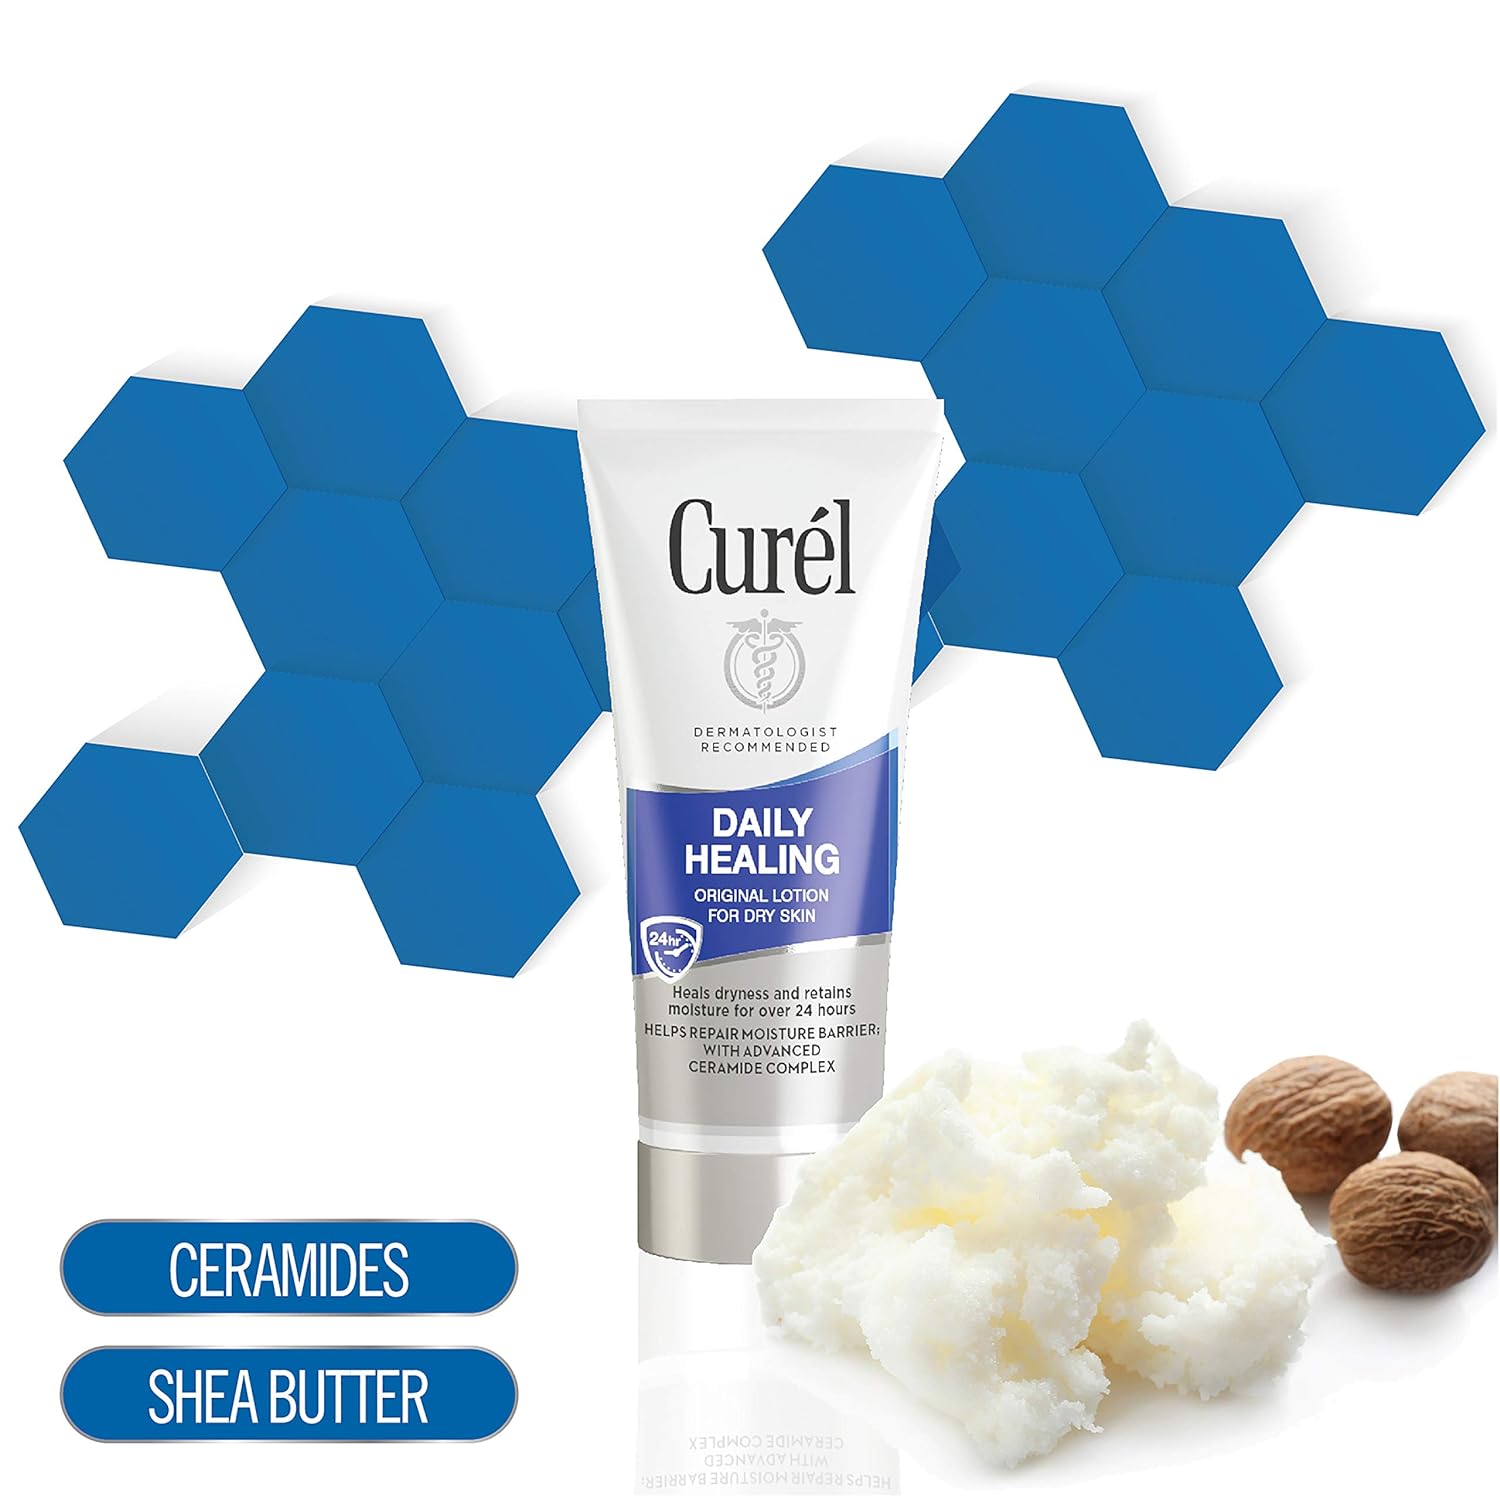 Curel Daily Healing Dry Skin Lotion, Hand and Body Moisturizer, 1 fl Ounce Travel Size, Mini size, 30-pack, with Advanced Ceramide Complex, helps to Repair Moisture Barrier : Beauty & Personal Care